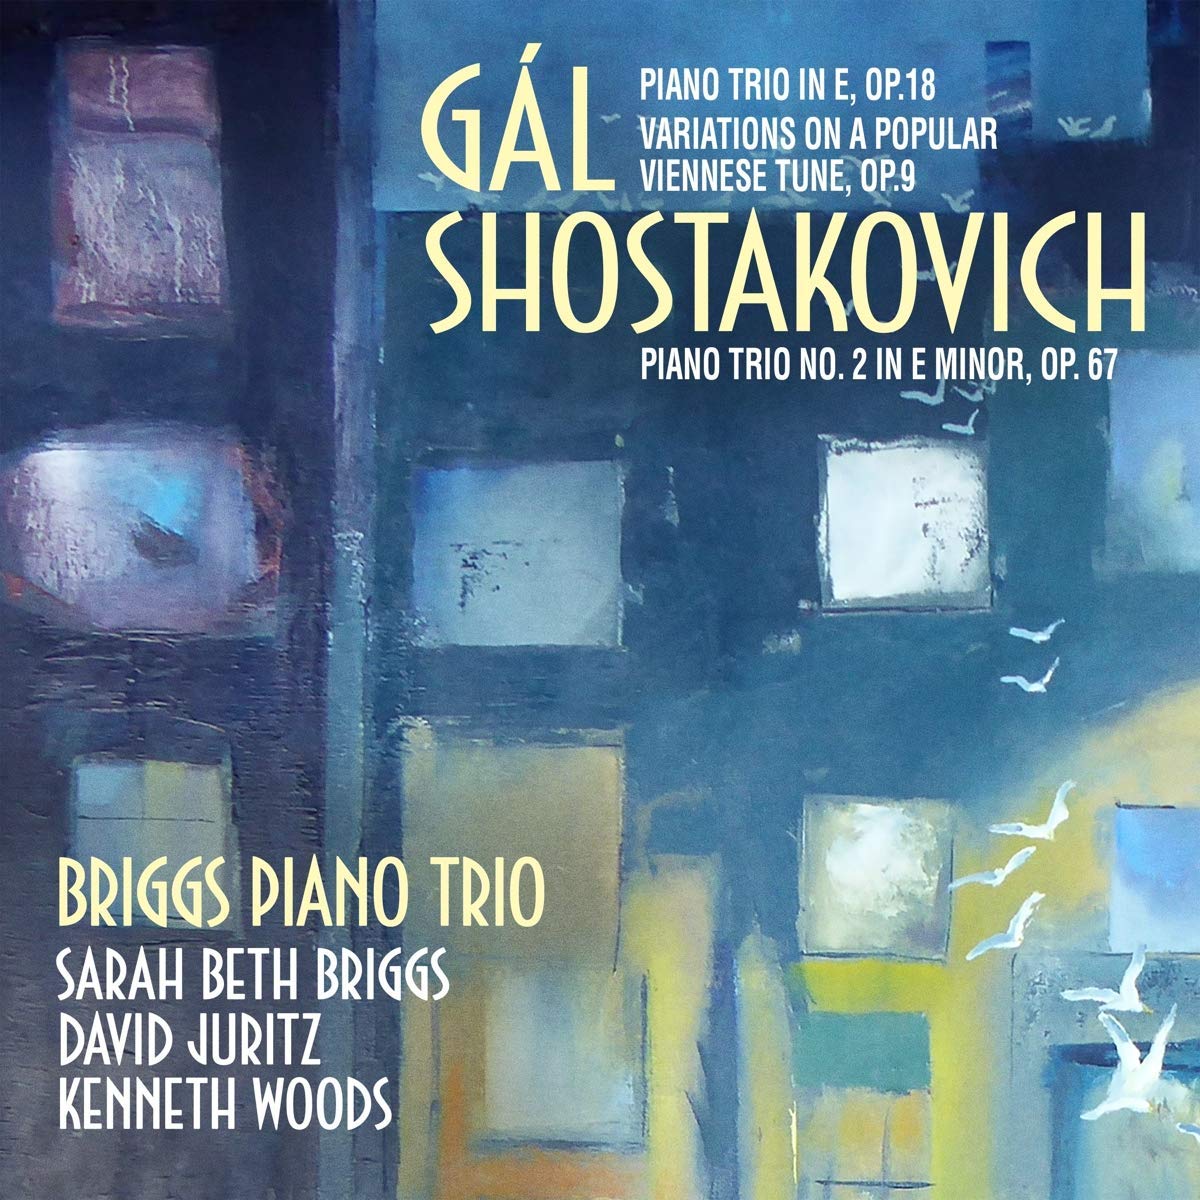 Gramophone Editor’s Choice for Piano Trios by Gál and Shostakovich